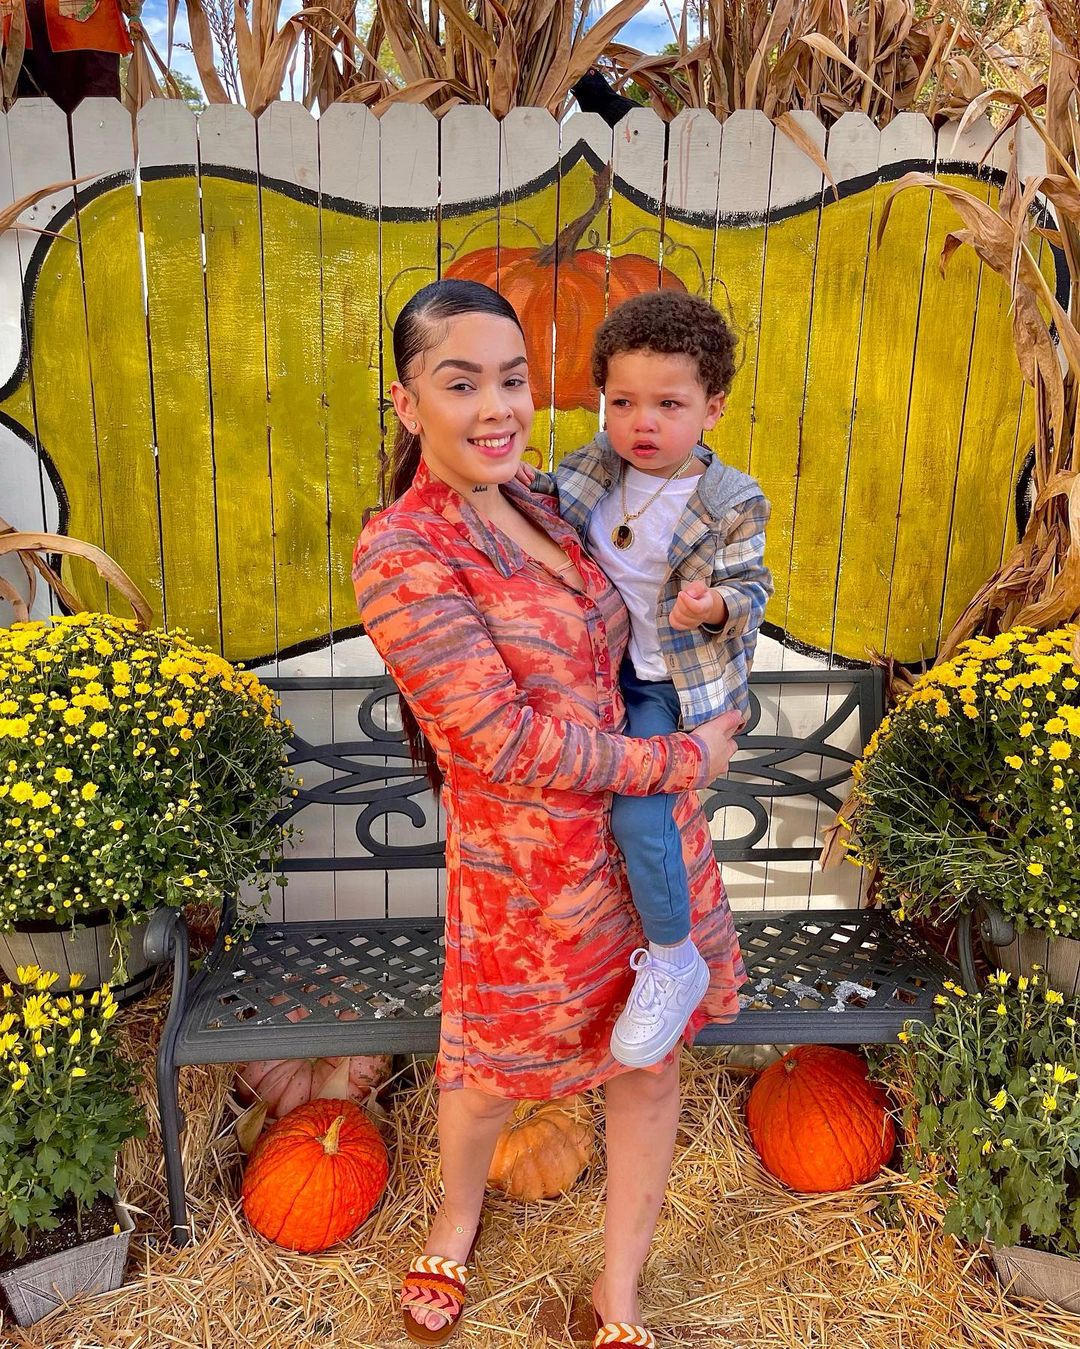 Jenesis Sanchez in orange dress carries a teary-eyed Gekyume Onfroy in an outdoor Halloween-themed photo booth